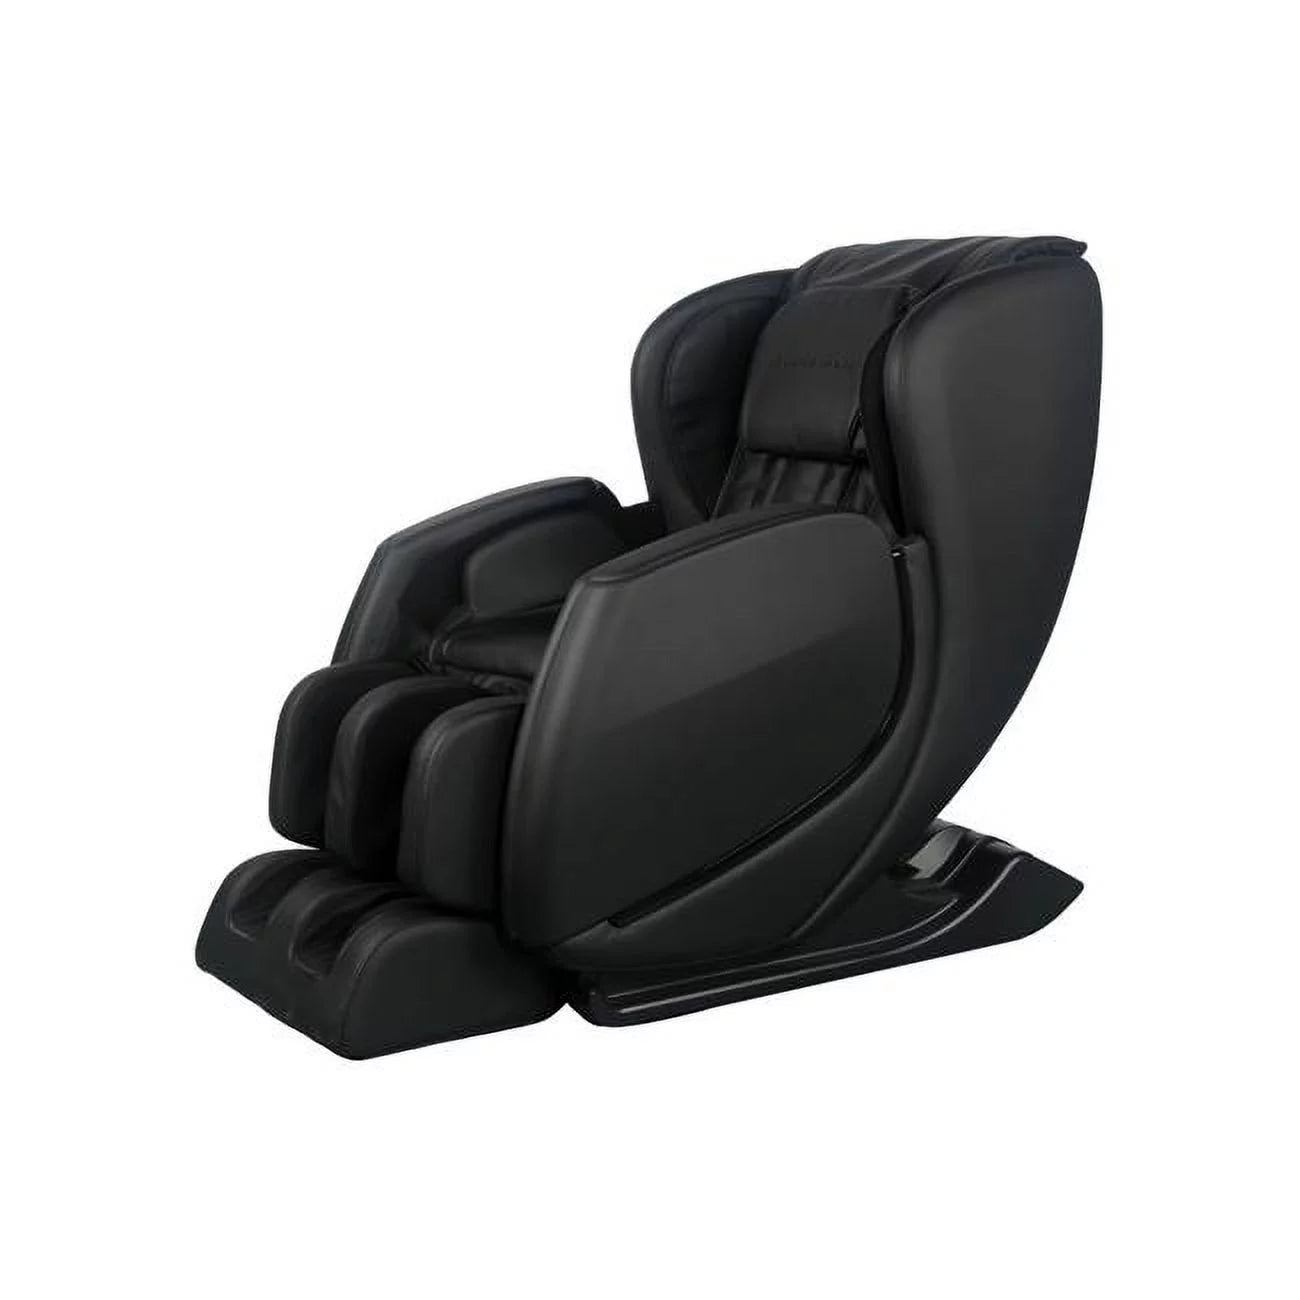 Revive Your Senses with the Black Revival Massage Chair